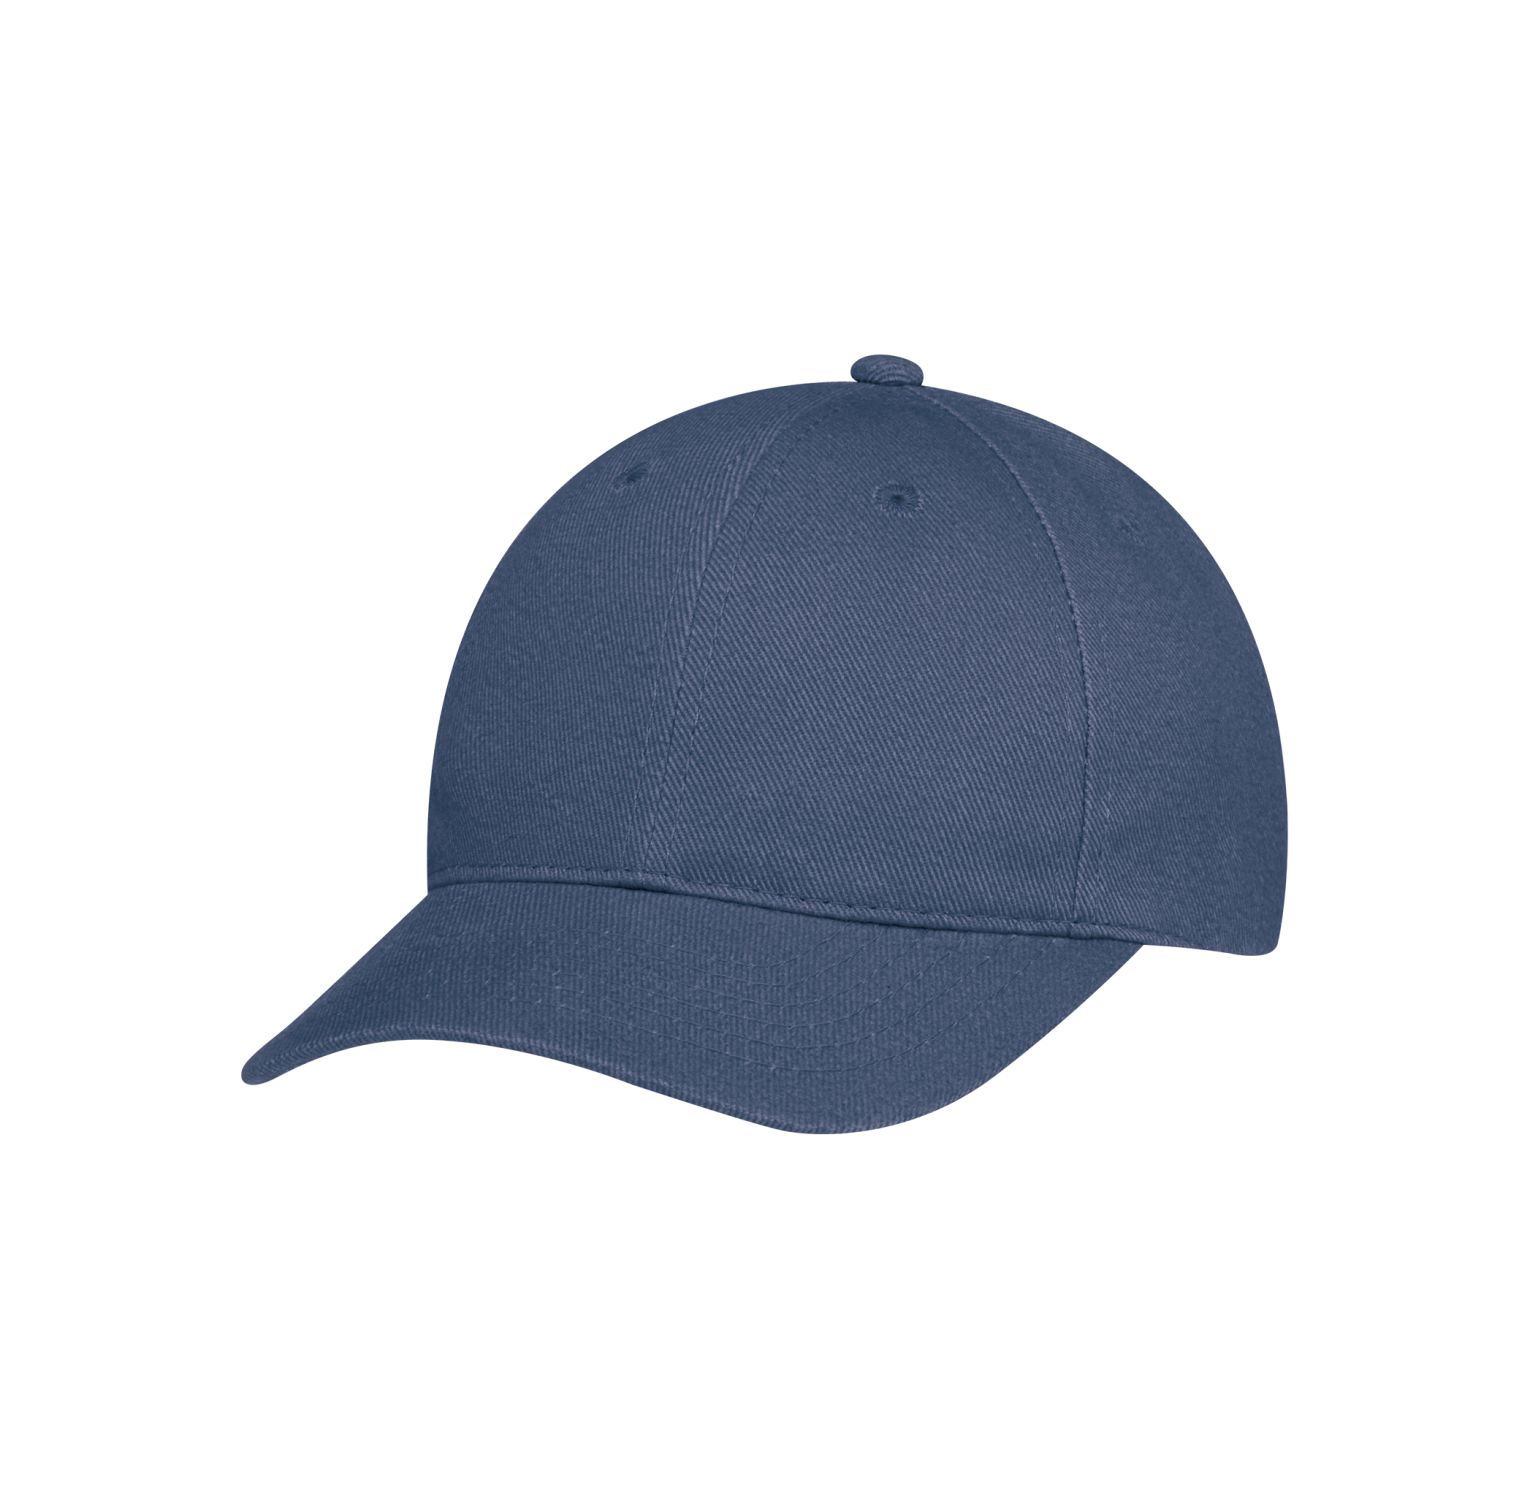 AJM Heavyweight Brushed Cotton Drill 6 Panel Constructed Contour Hat #2C390M Navy